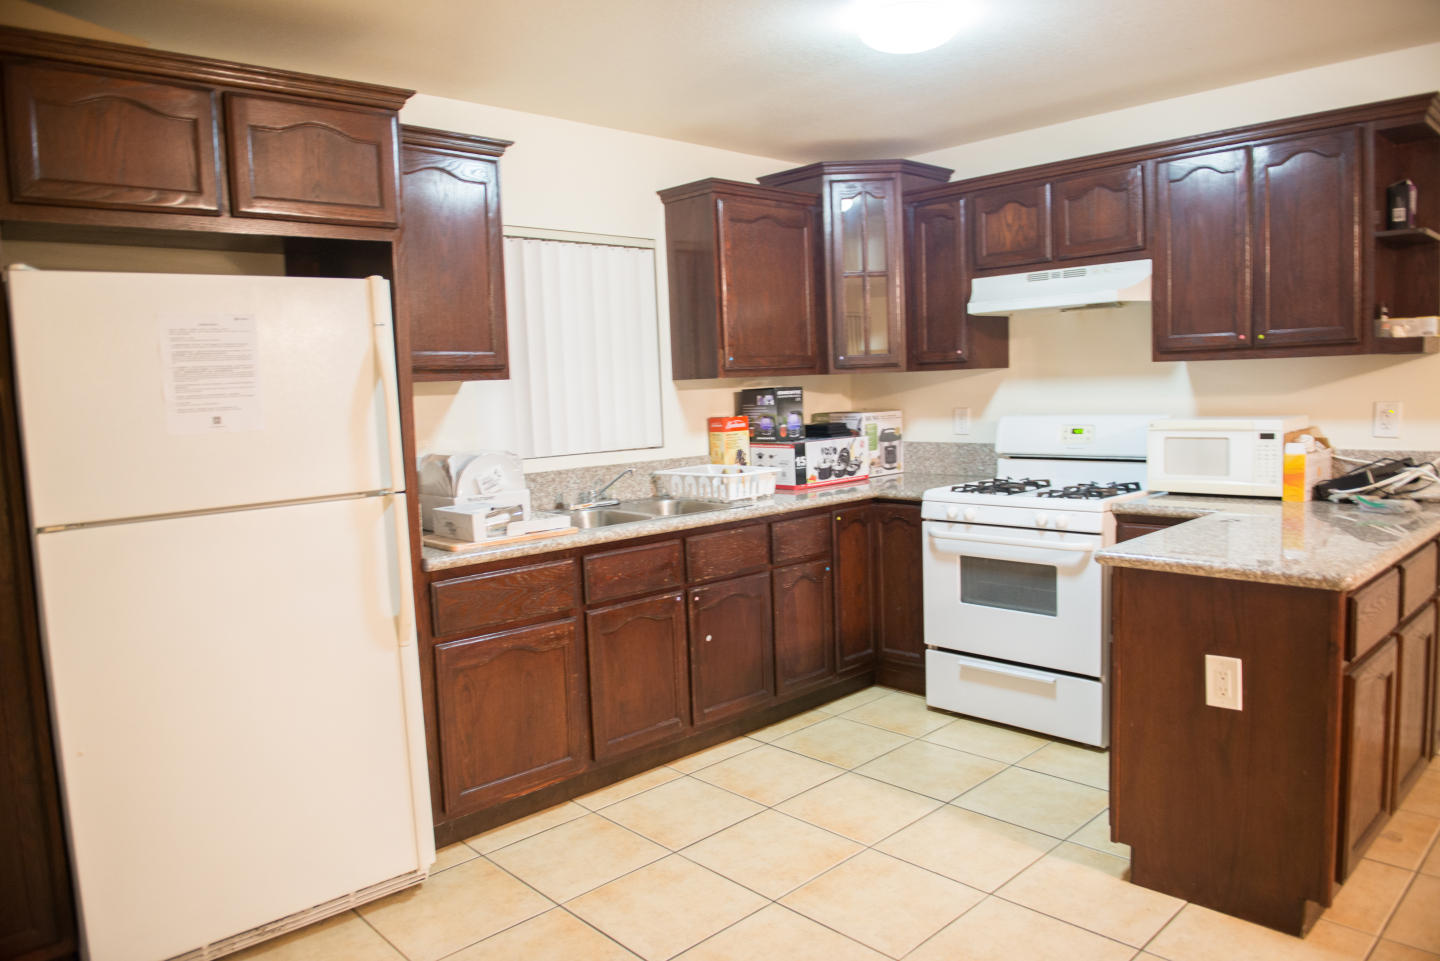 Large Kitchen, brown cabinets and white fridge